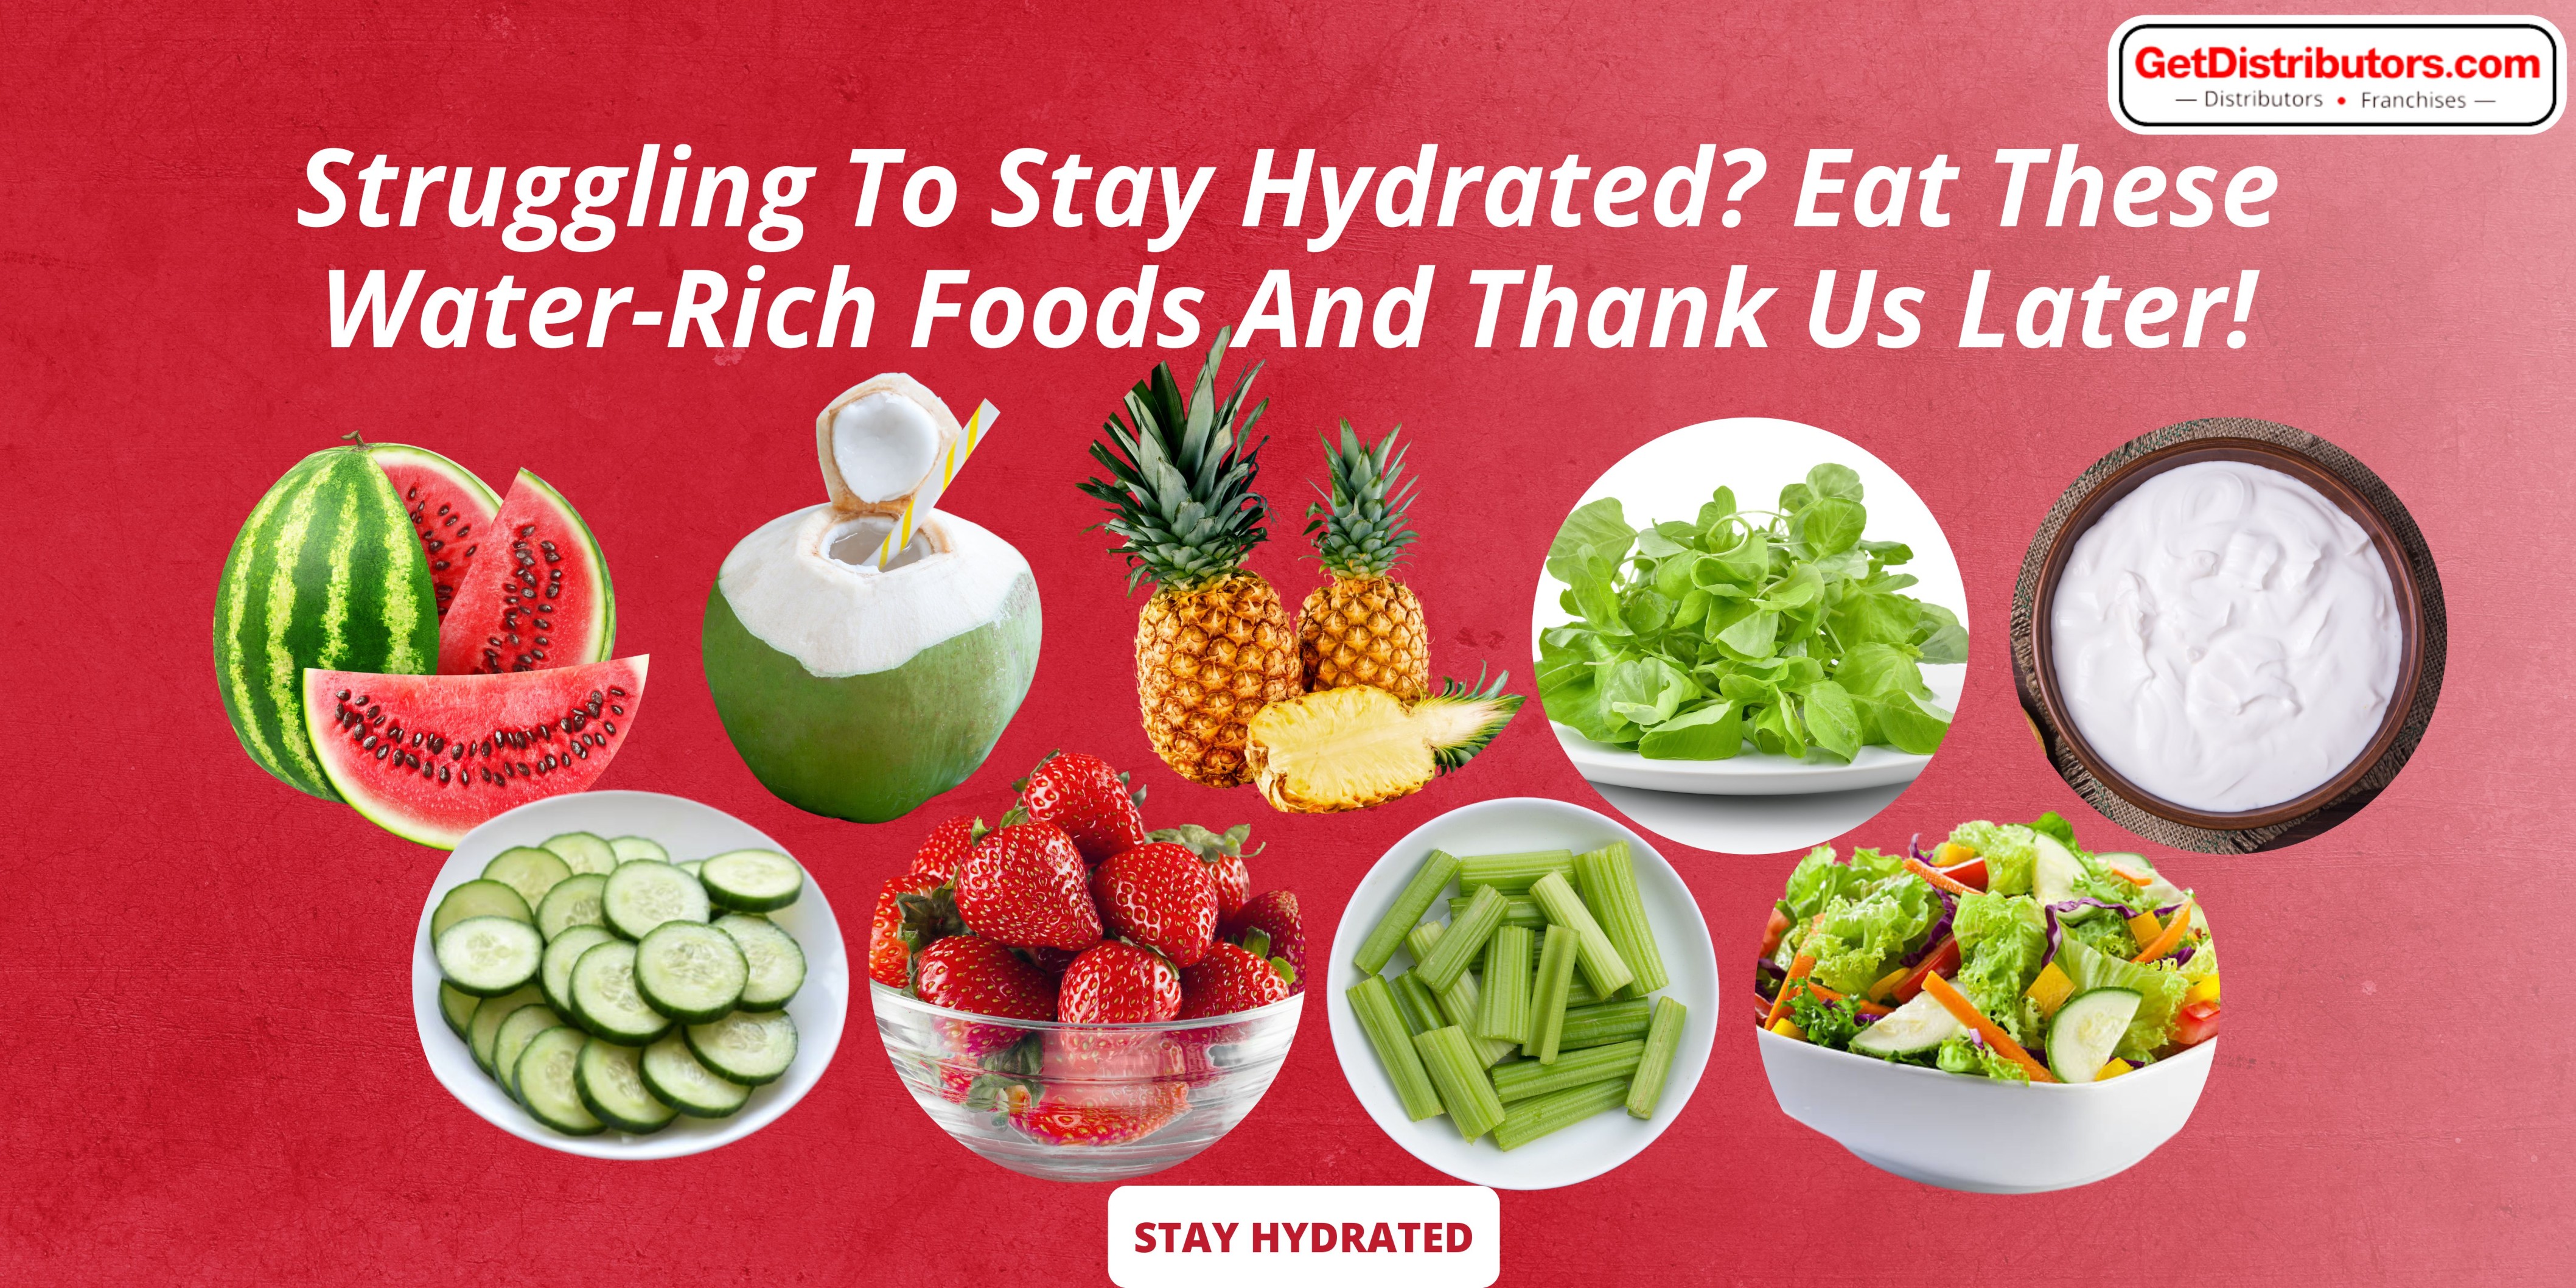 Struggling To Stay Hydrated? Eat These Water-Rich Foods And Thank Us Later!